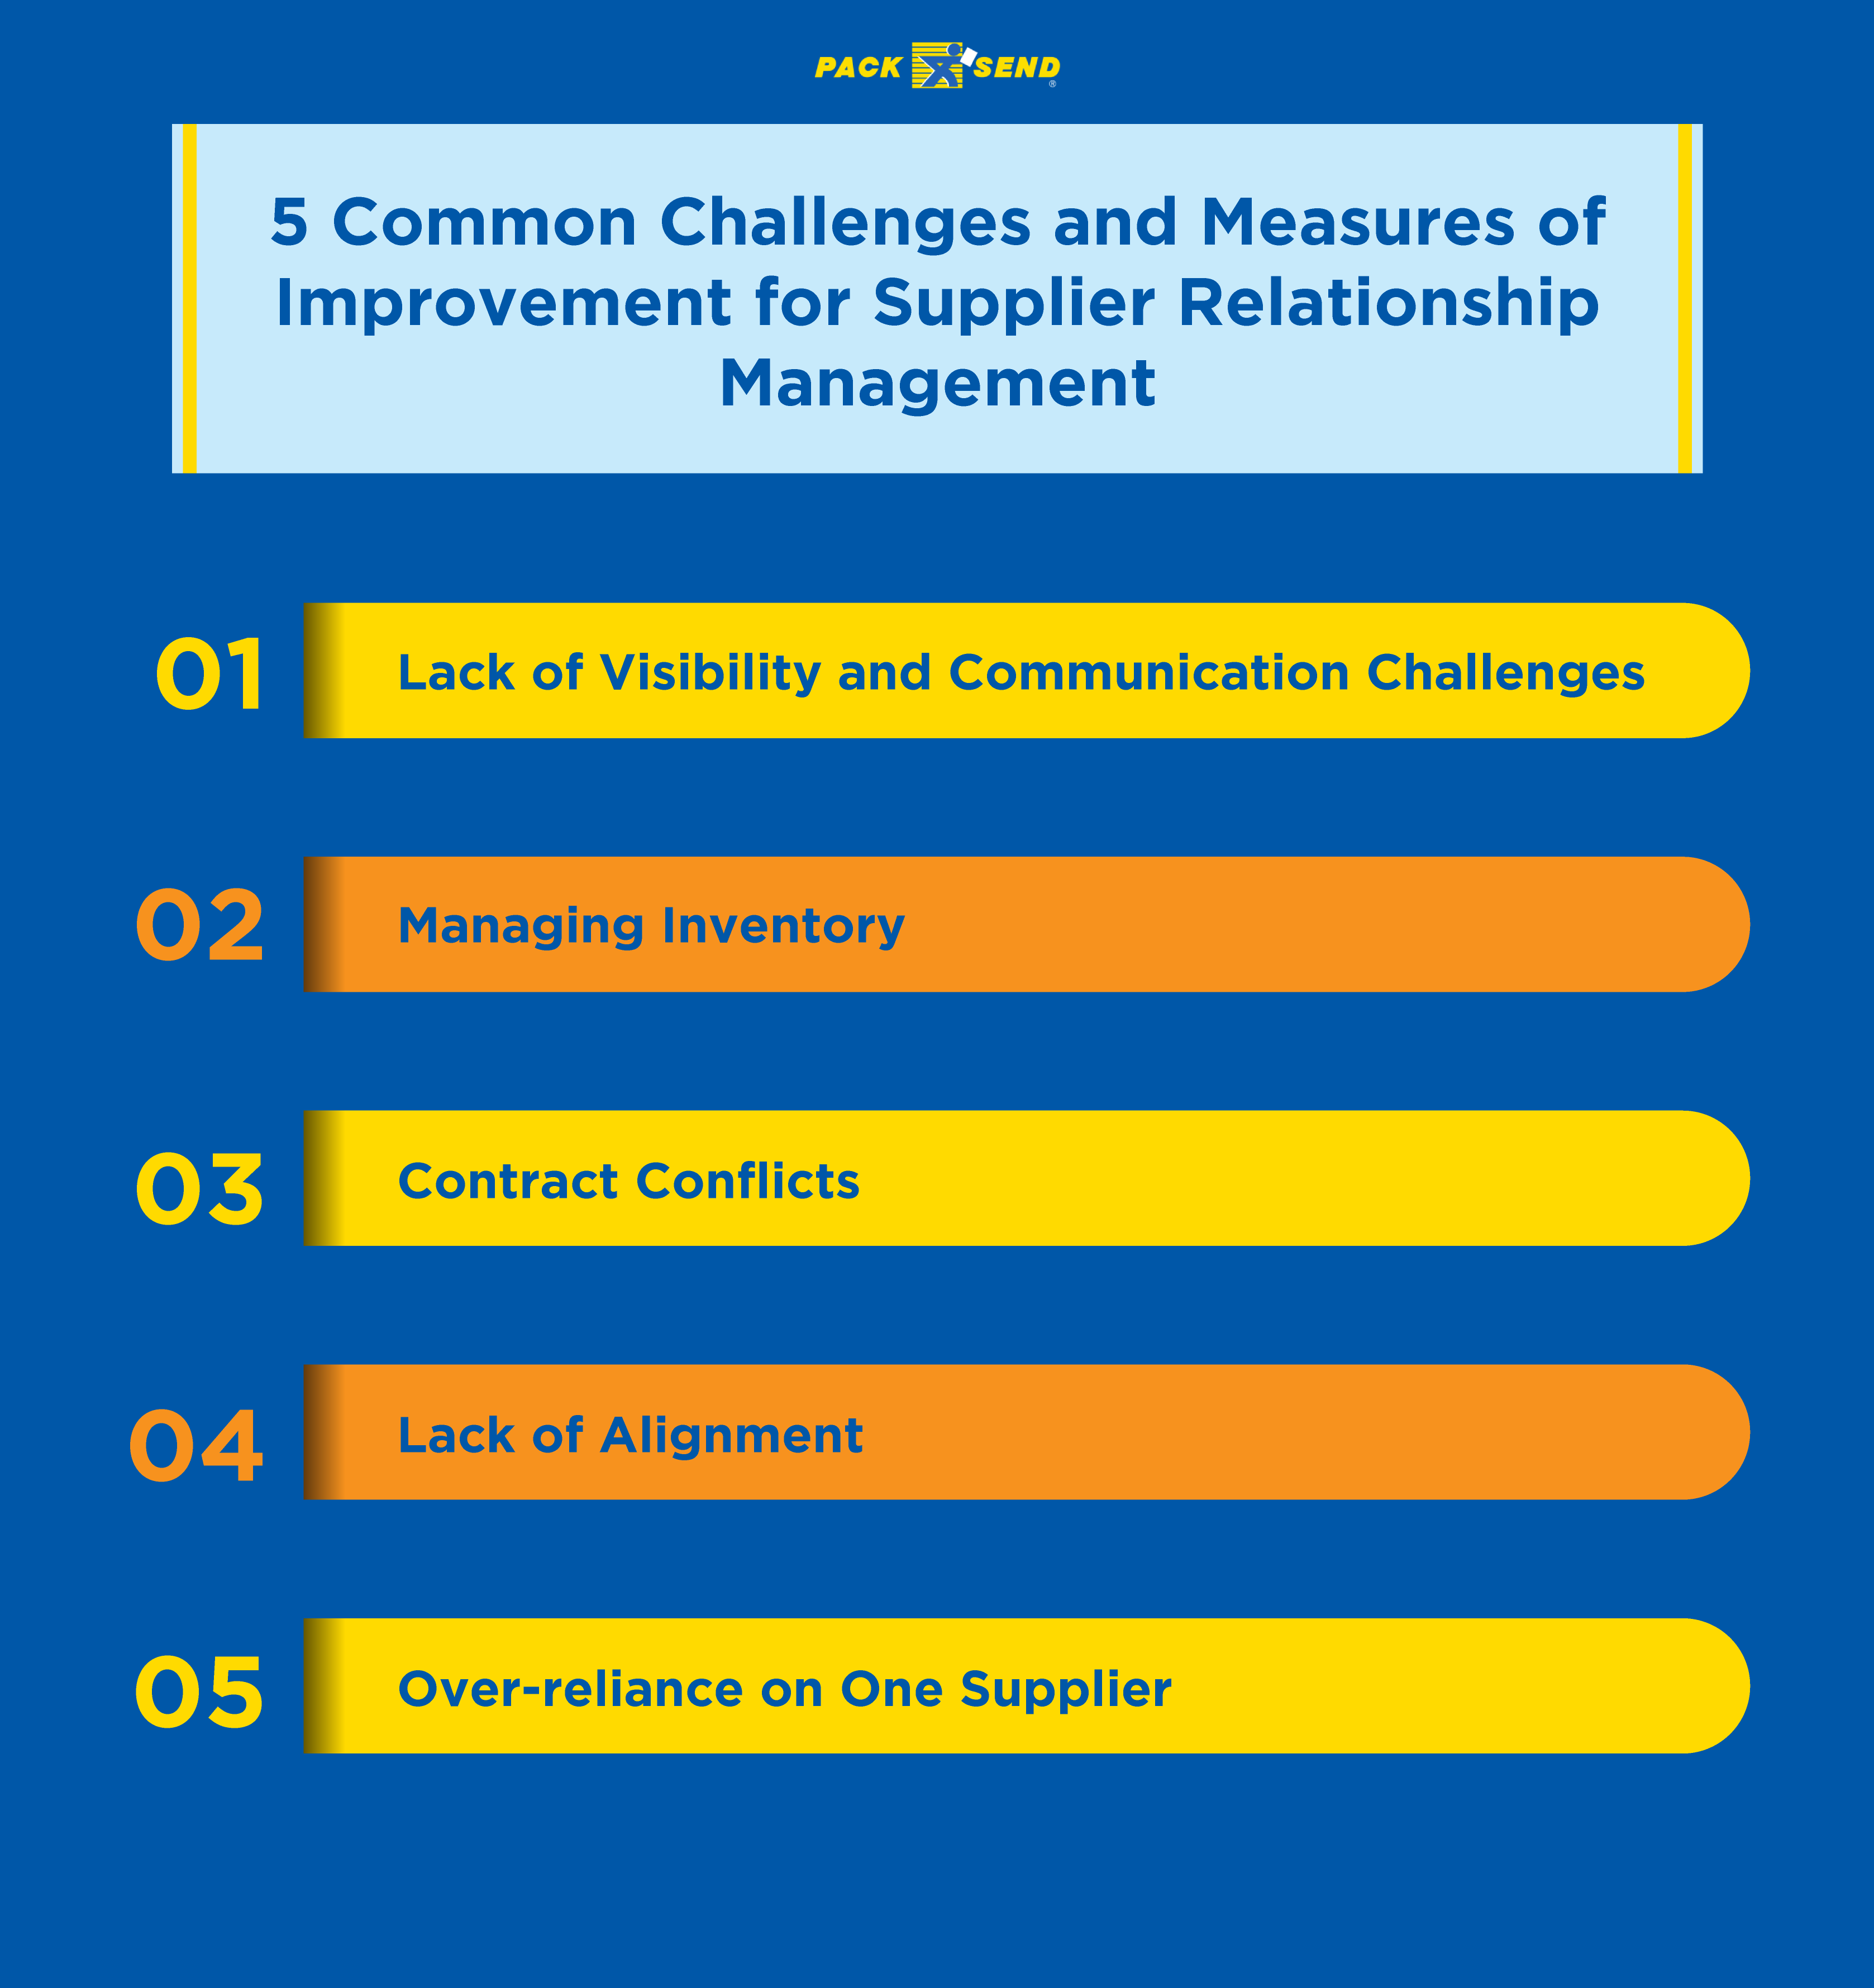 5 Common Challenges and Measures of Improvement for Supplier Relationship Management